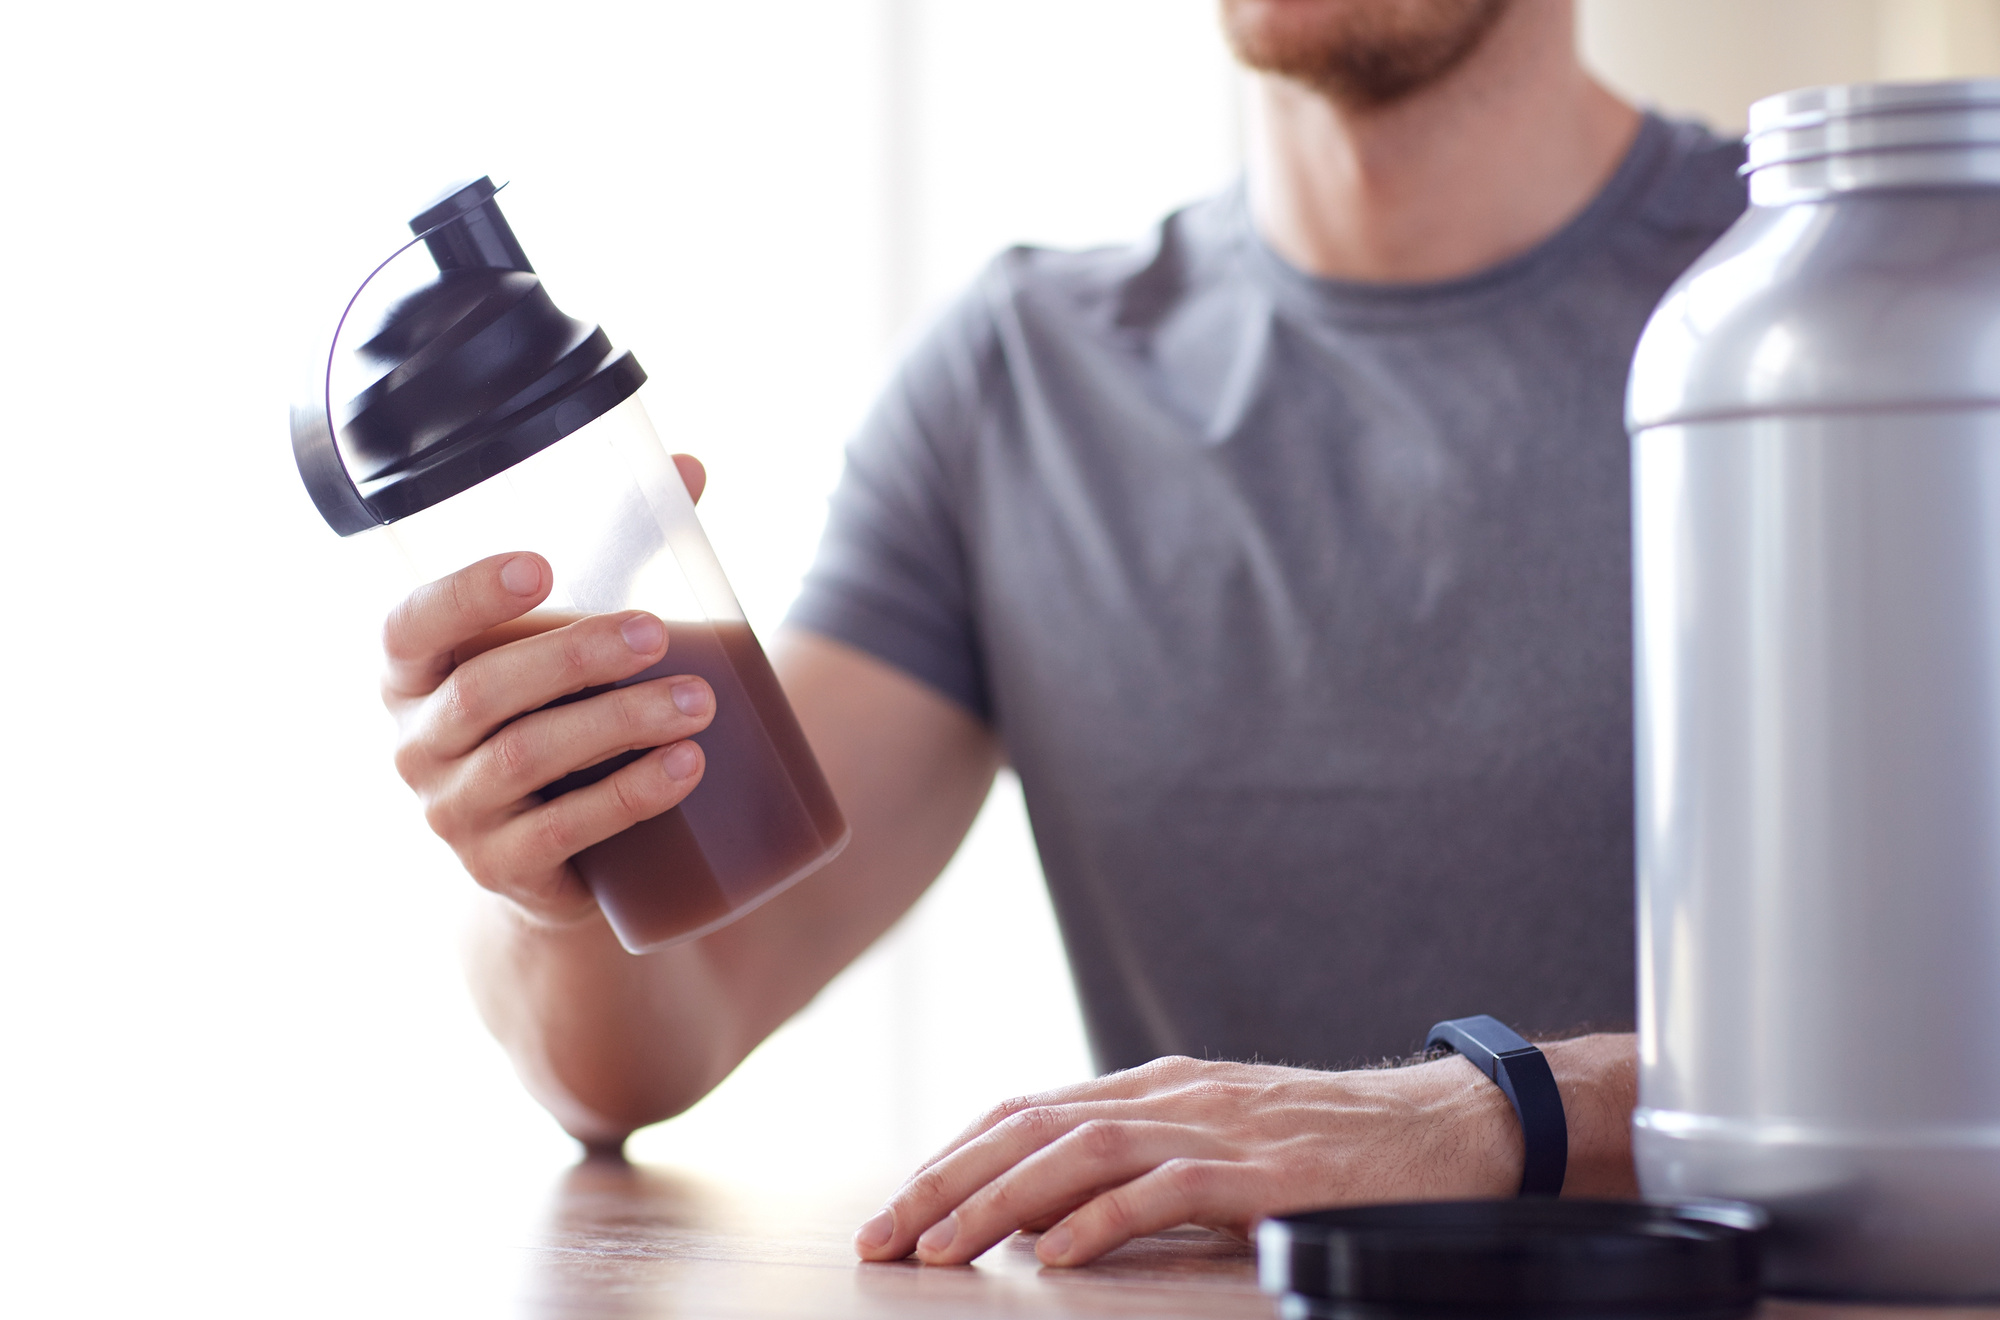 Getting to grips with fitness supplements is daunting. This guide helps you understand the types of muscle recovery supplements, and how to use them properly.